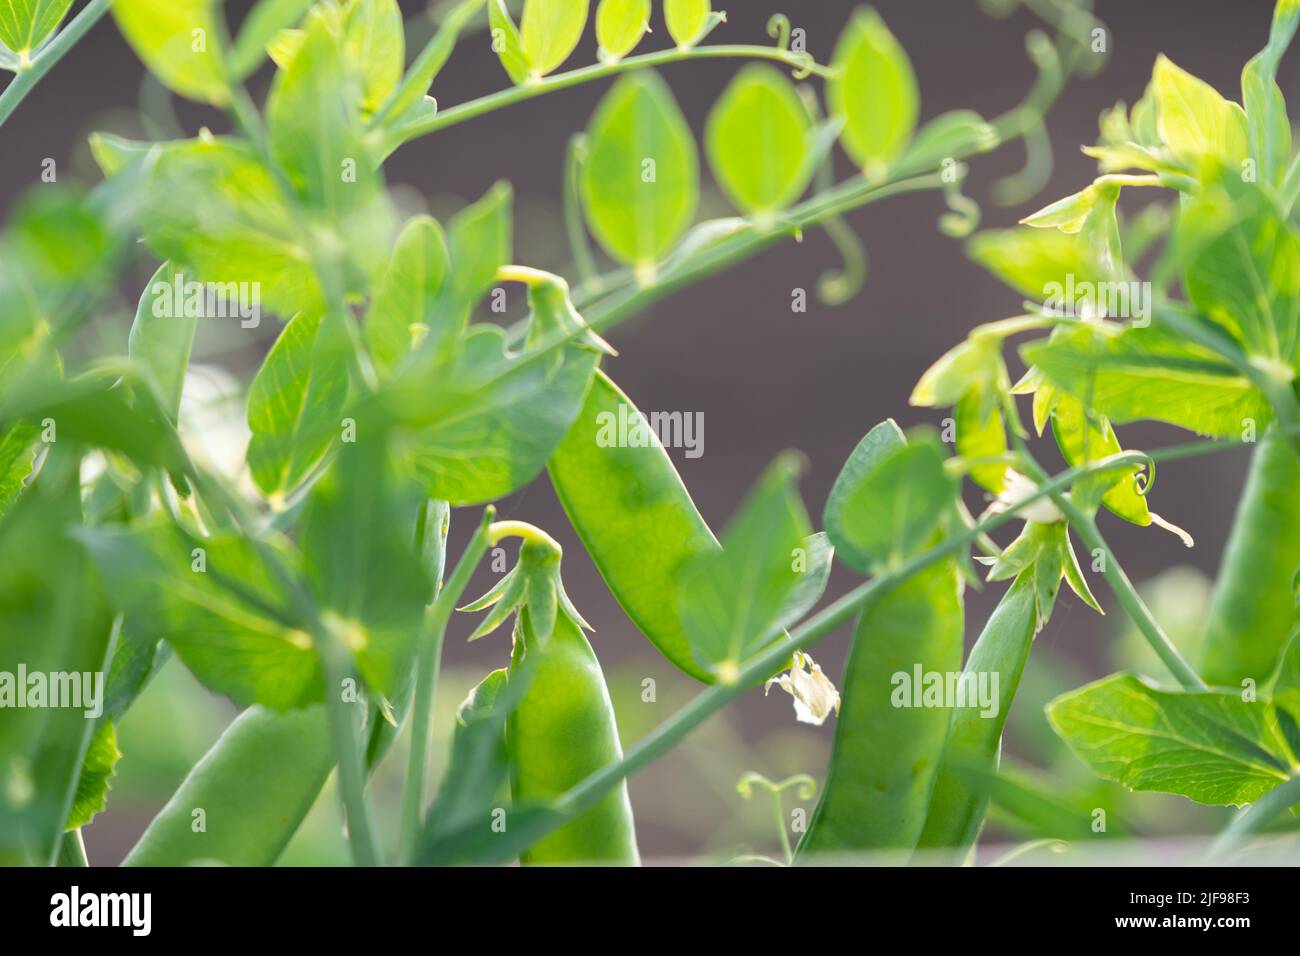 Bush of sweet pea with ripe pods cultivated on vegetable garden Stock Photo